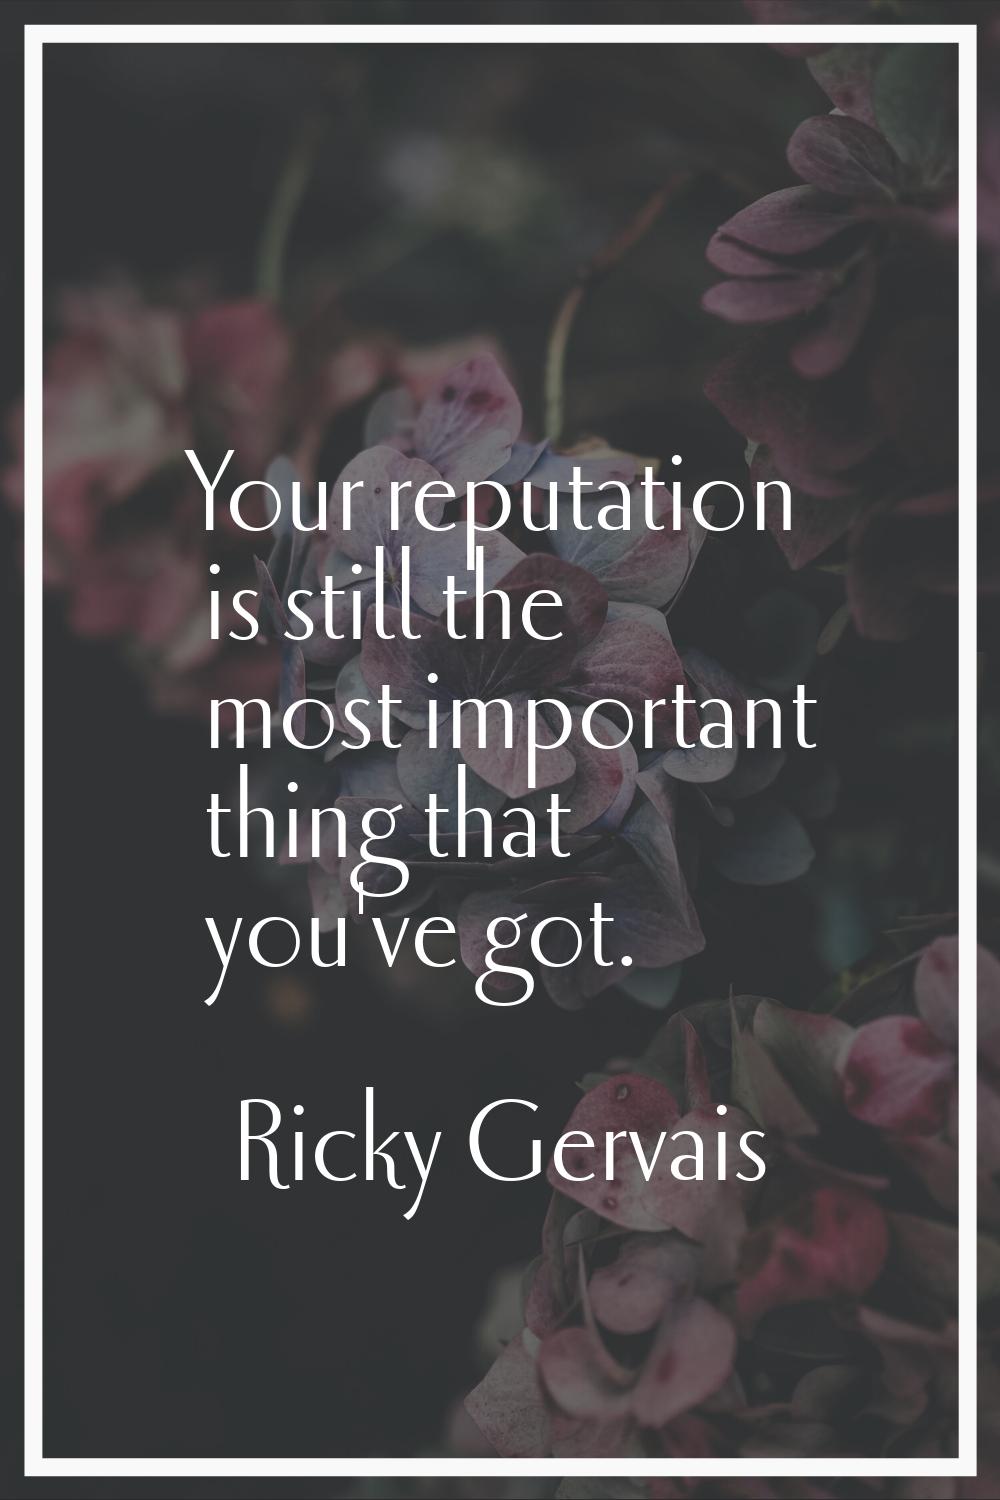 Your reputation is still the most important thing that you've got.